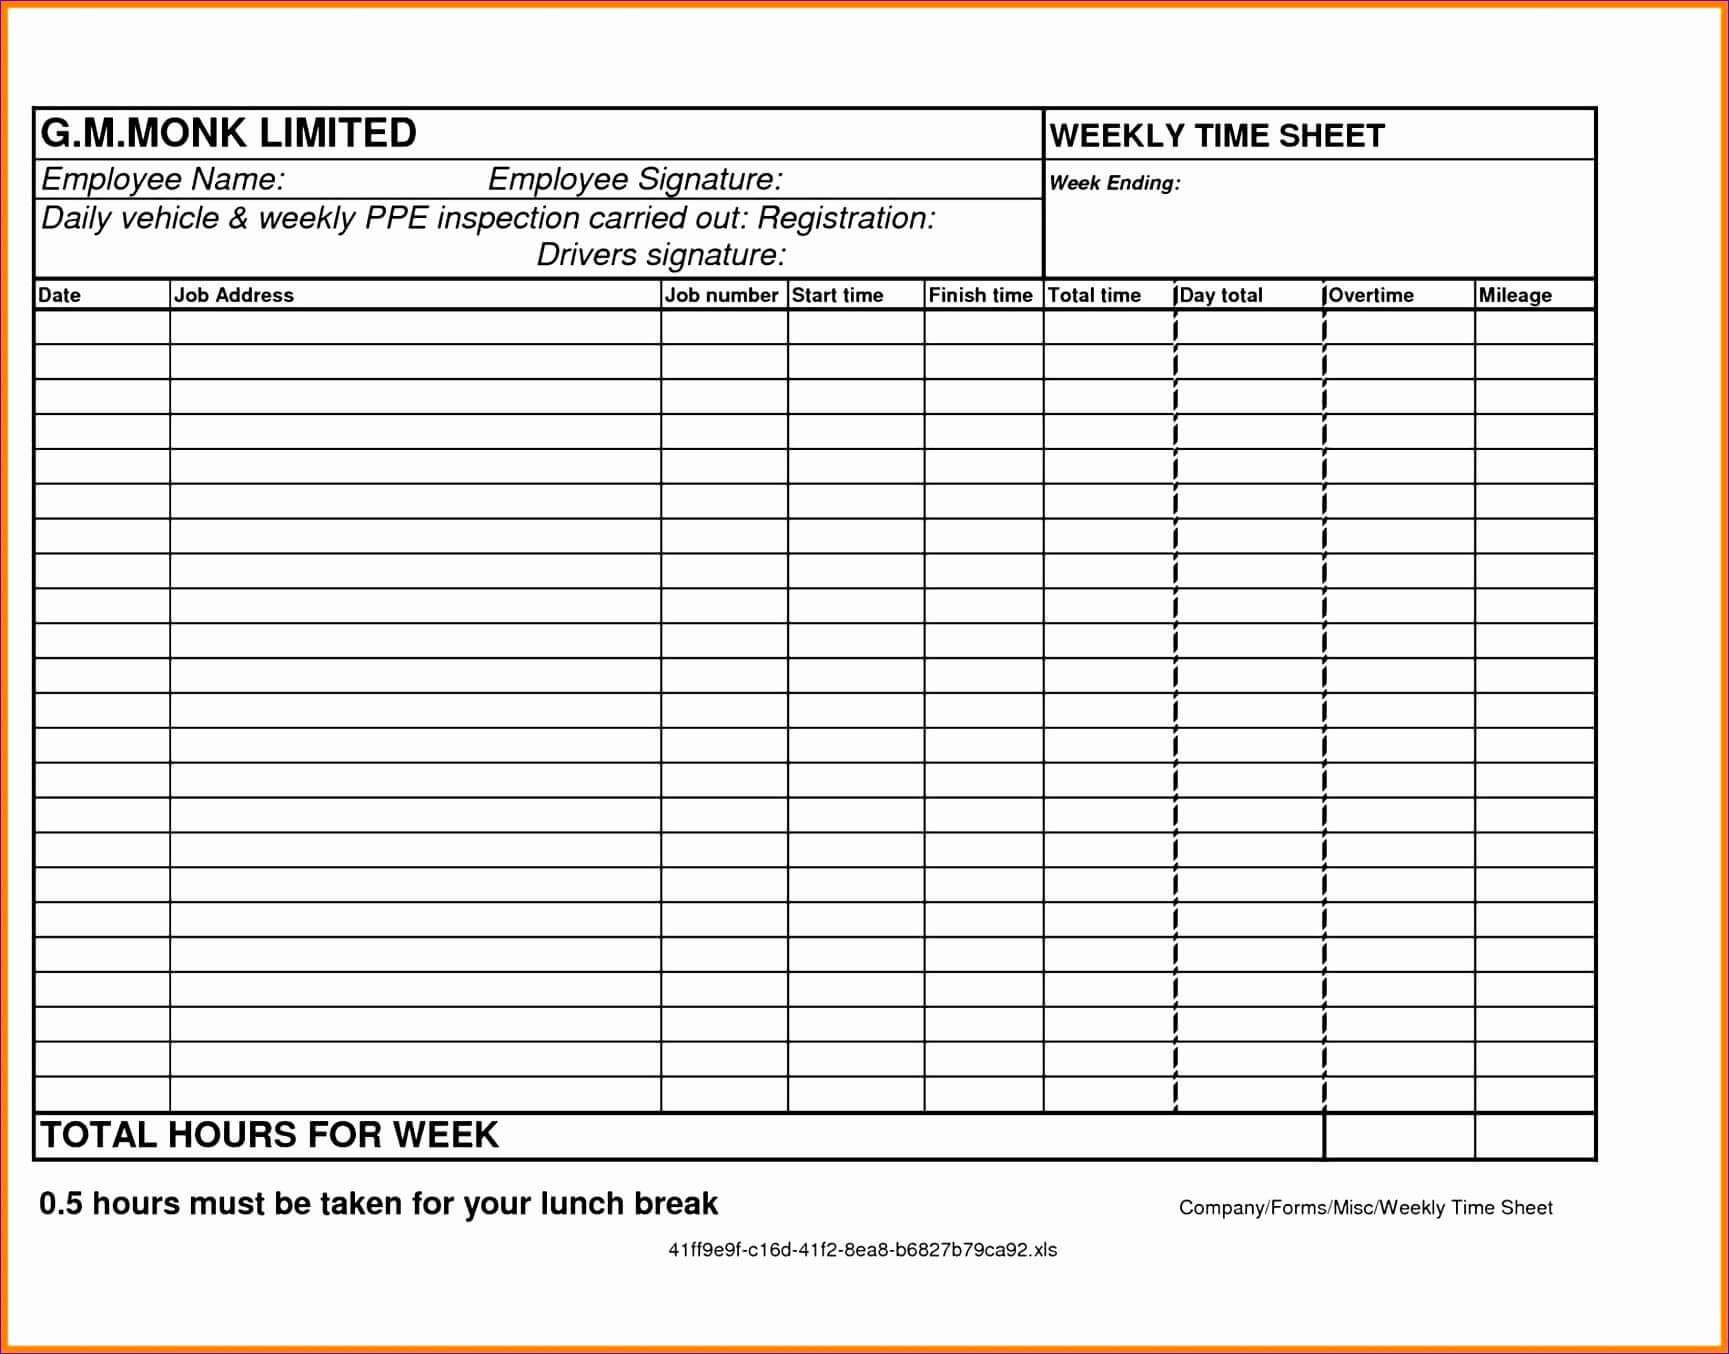 014-free-printable-weekly-employee-time-sheets-multiple-pdf-throughout-blank-petition-template